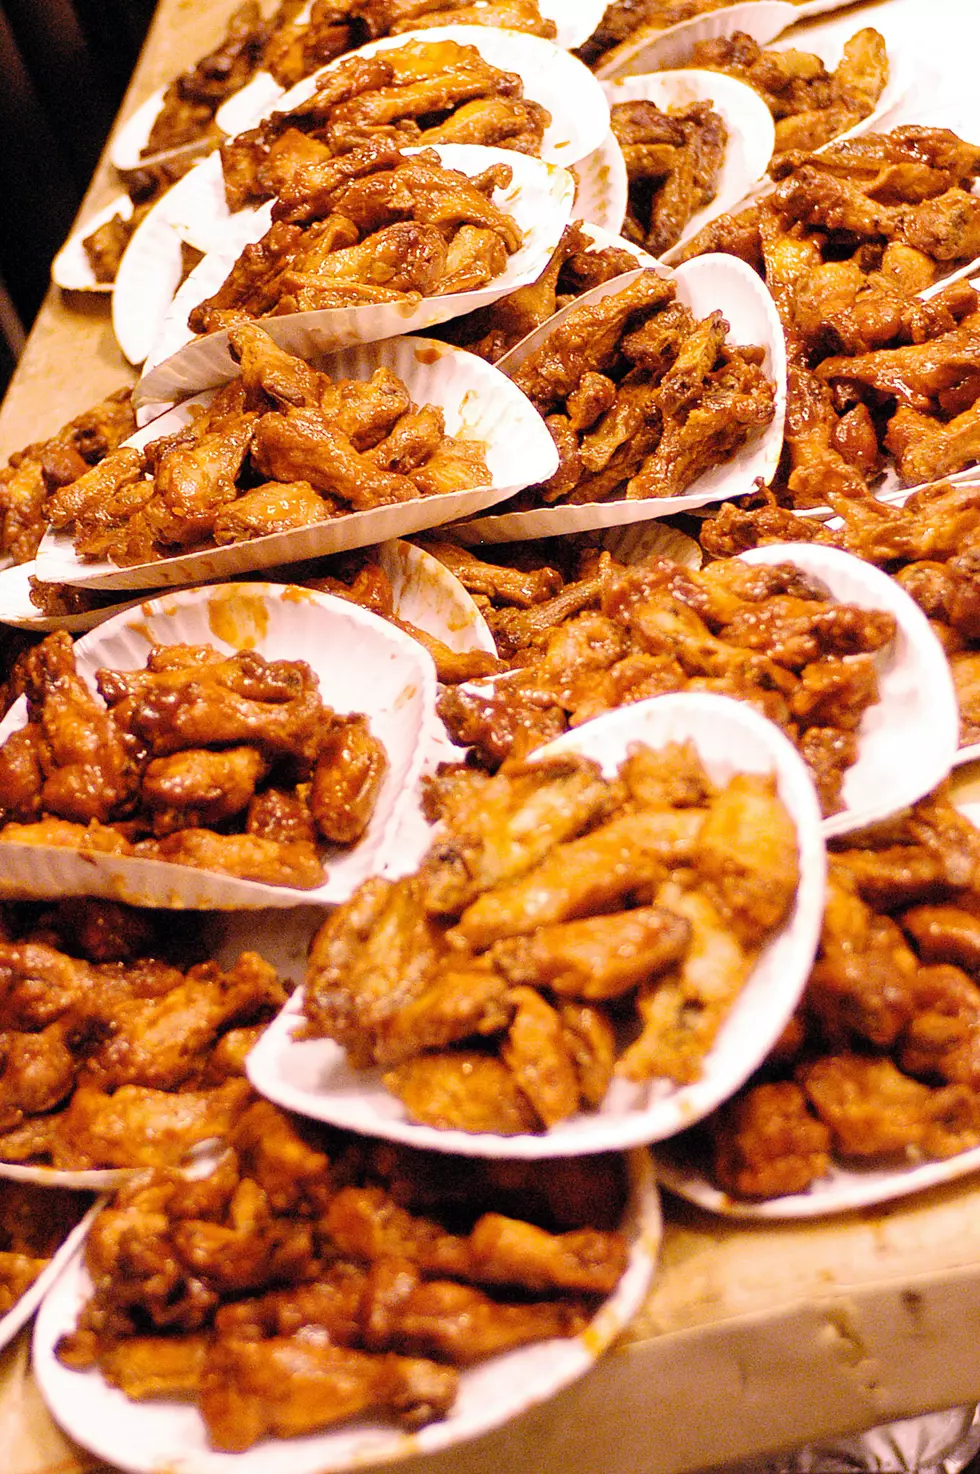 Get Free Wings From This Restaurant In WNY For National Chicken Wing Day